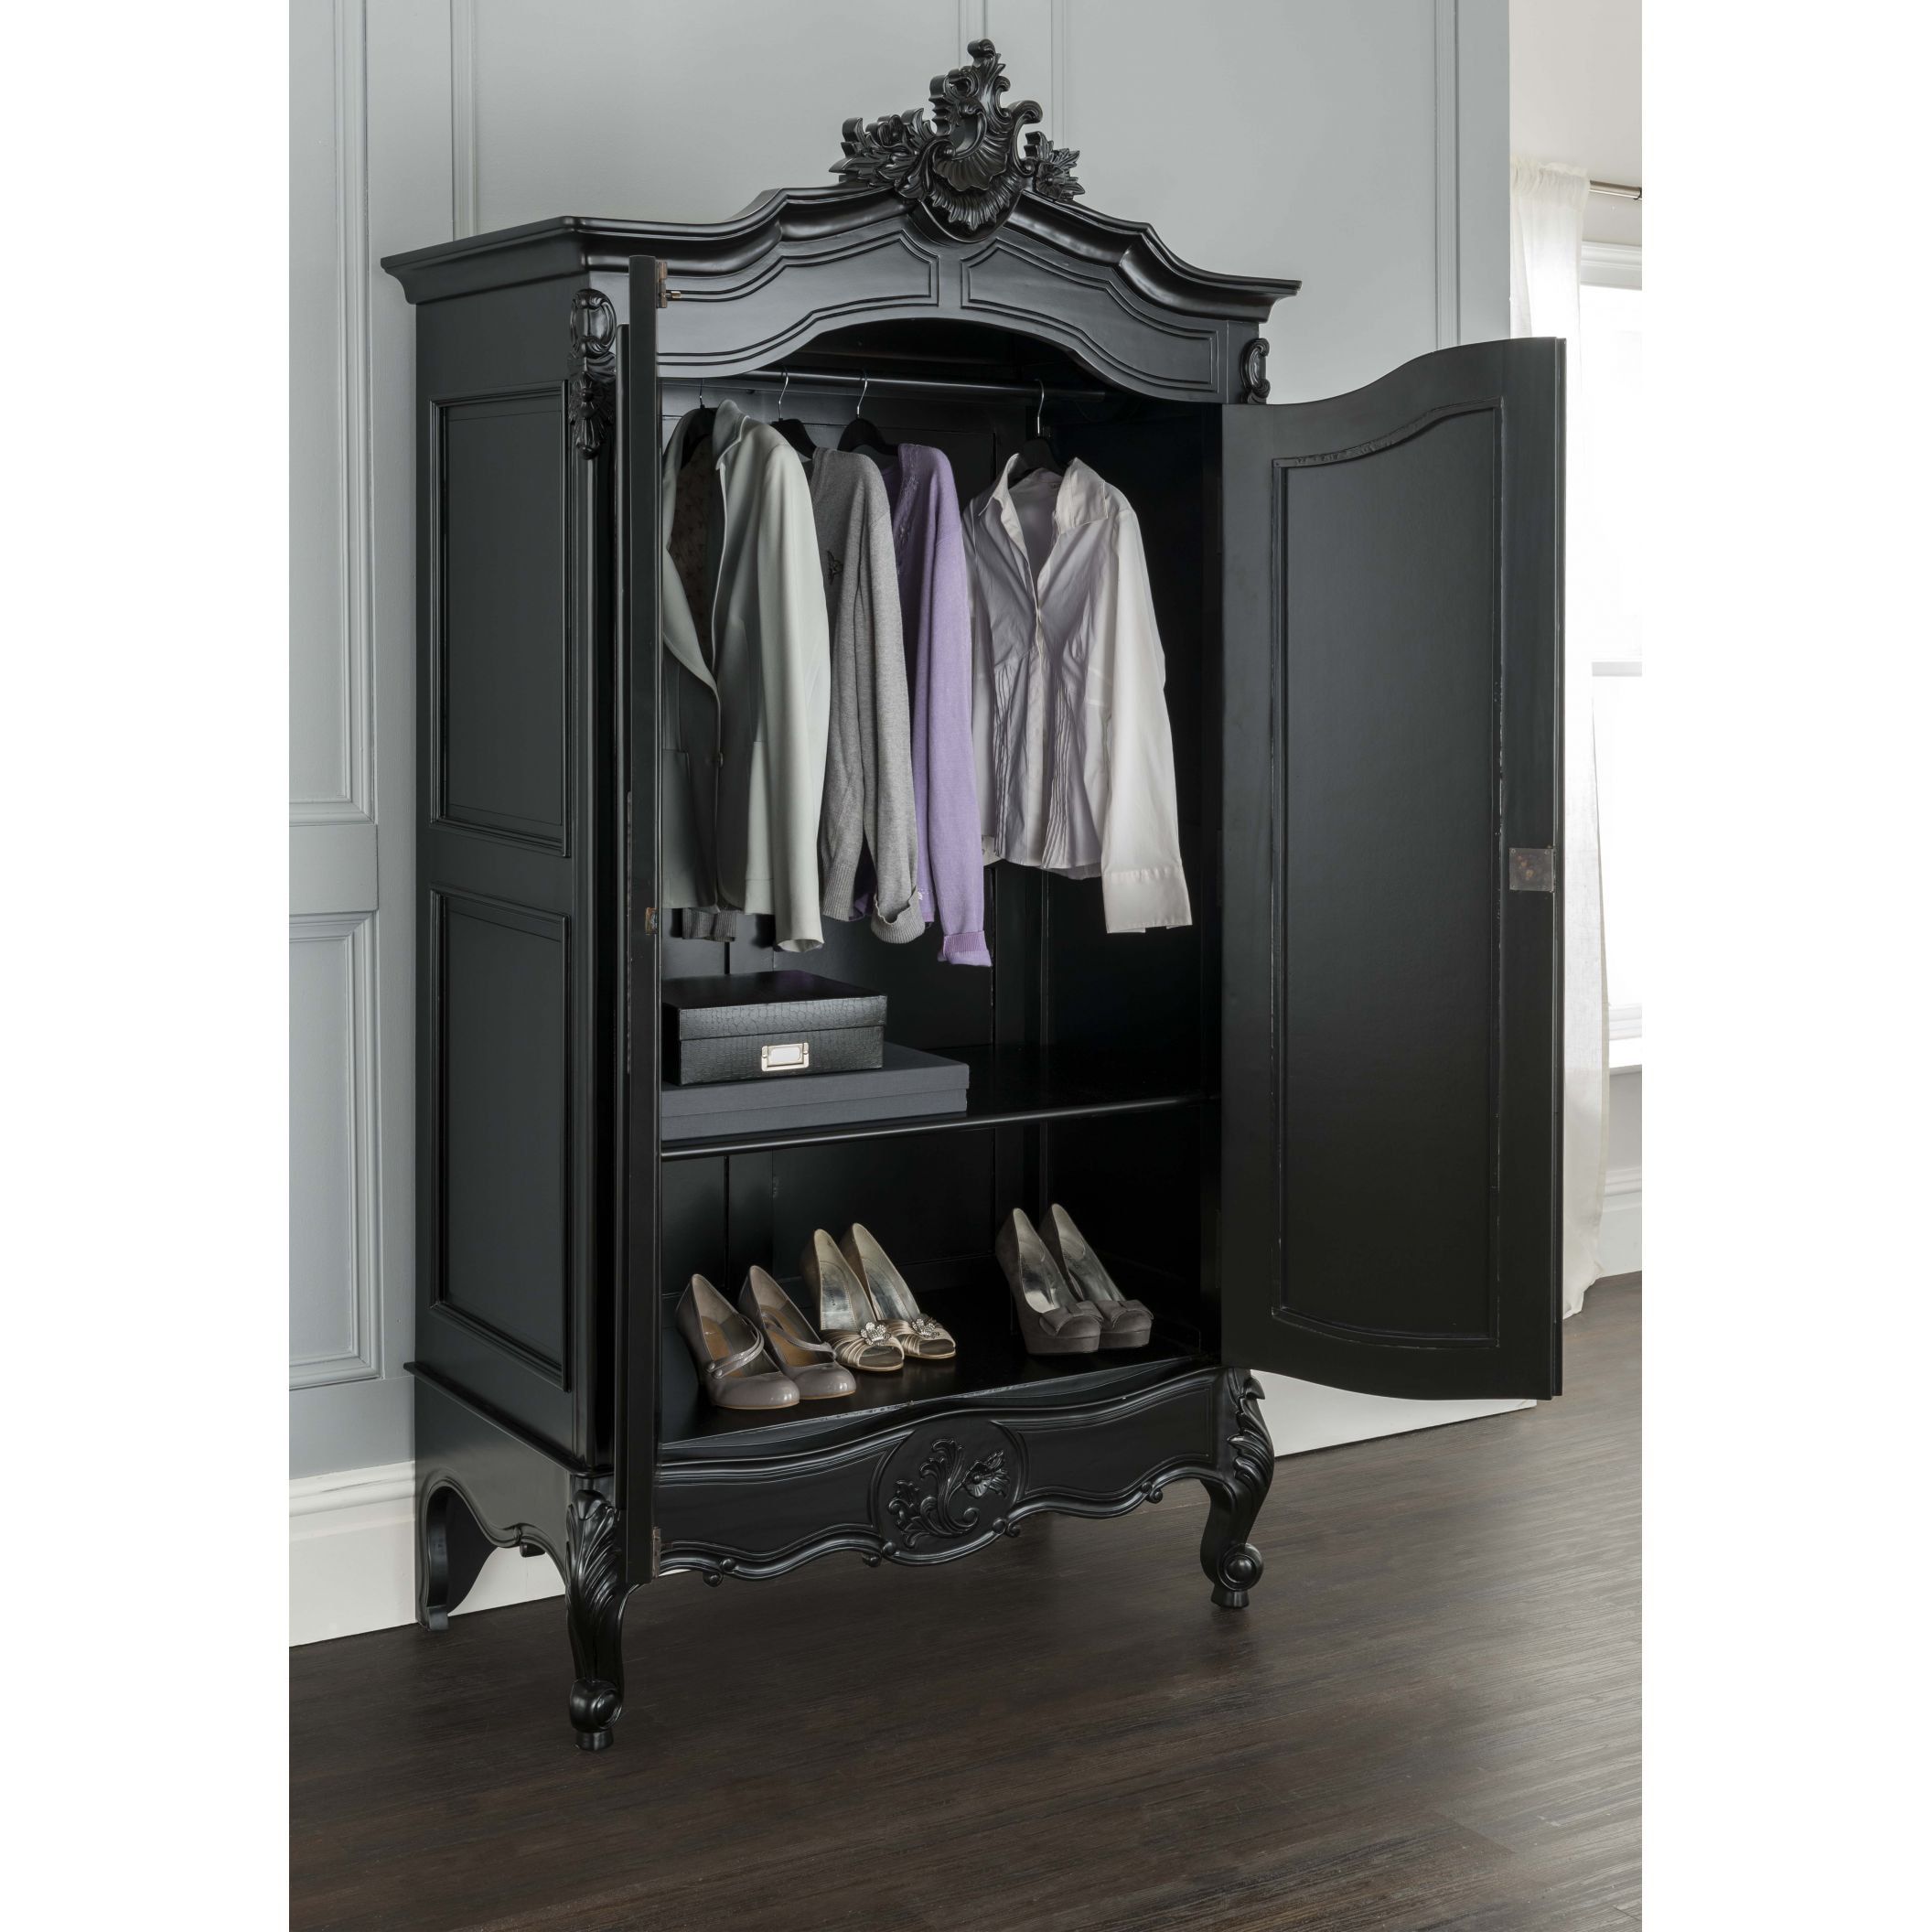 La Rochelle Antique French Wardrobe | Black Furniture Collection Intended For Black French Style Wardrobes (View 5 of 15)